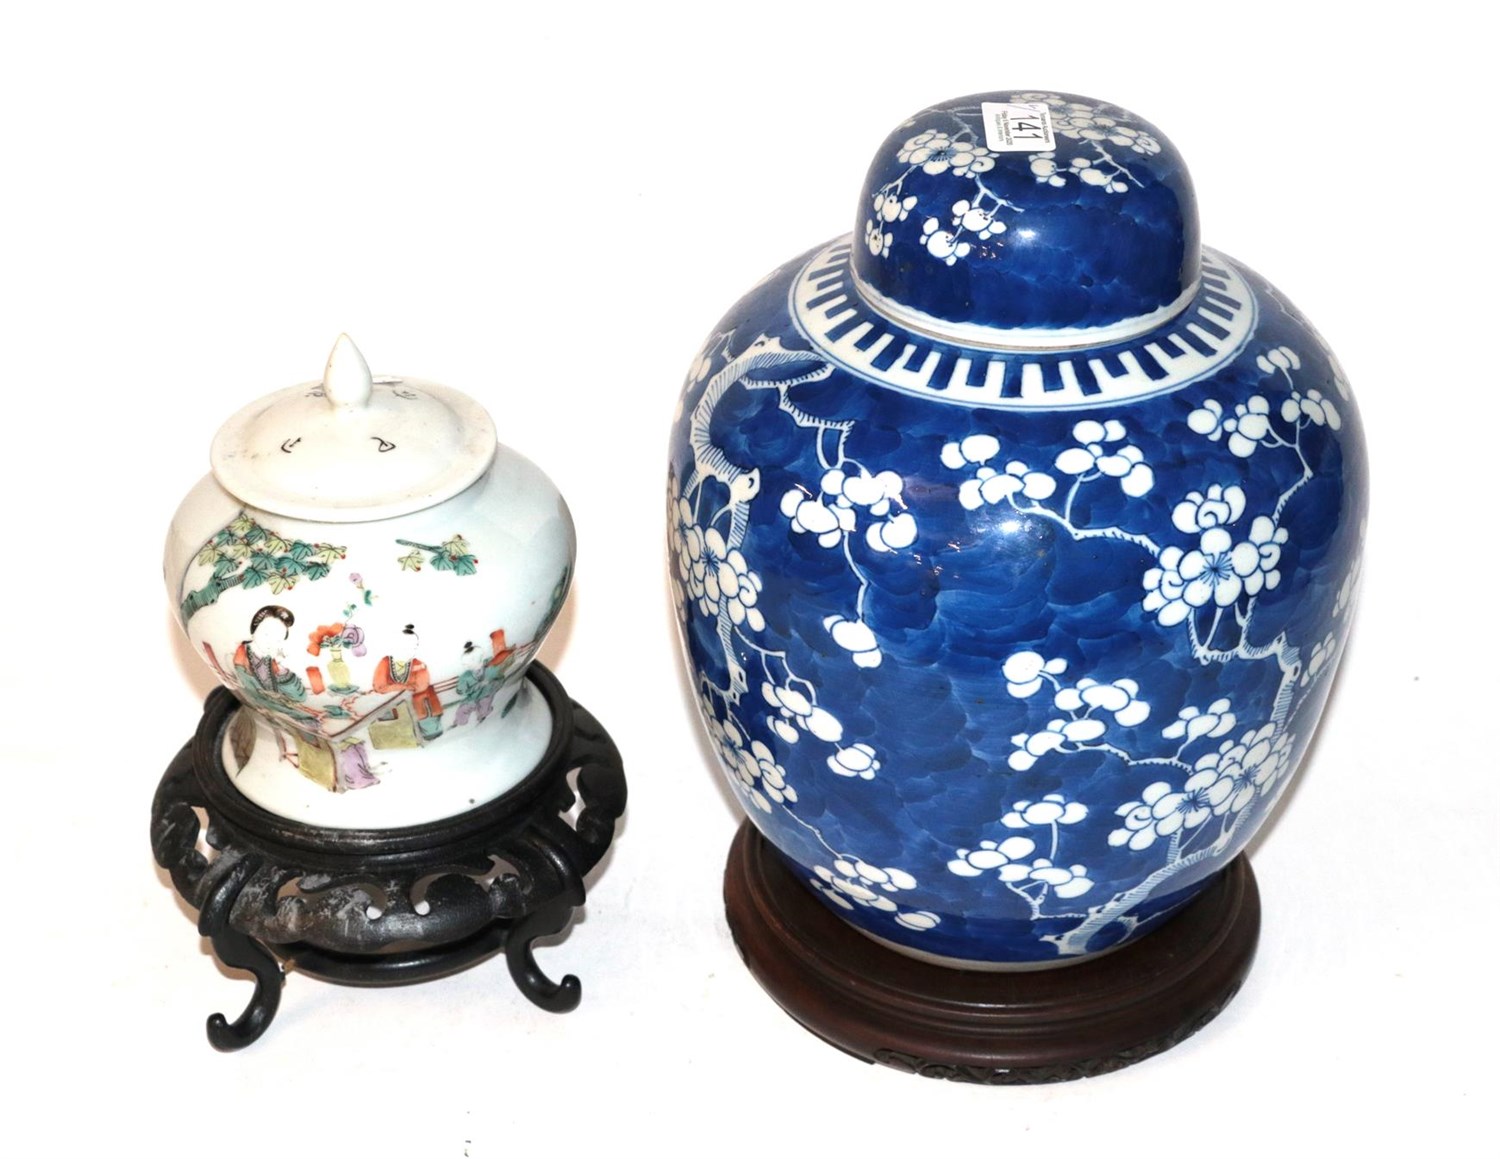 Lot 141 - A Chinese prunus blossom ginger jar and cover and another ginger jar and cover, both on stands